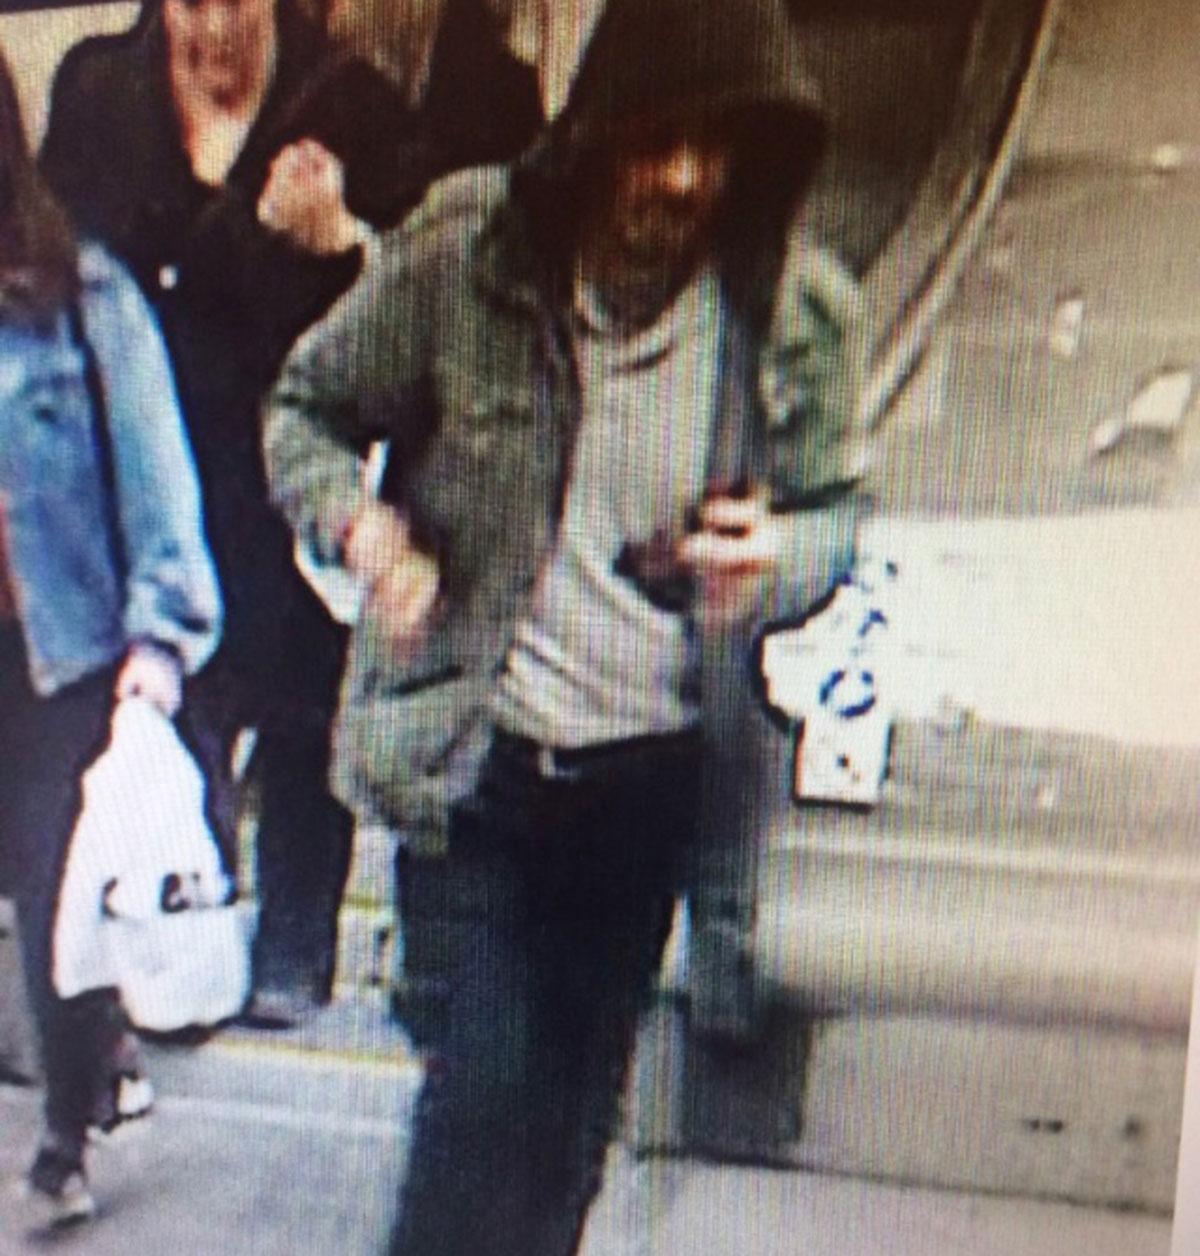 This photo released by Swedish police shows a person that the investigators want for questioning.